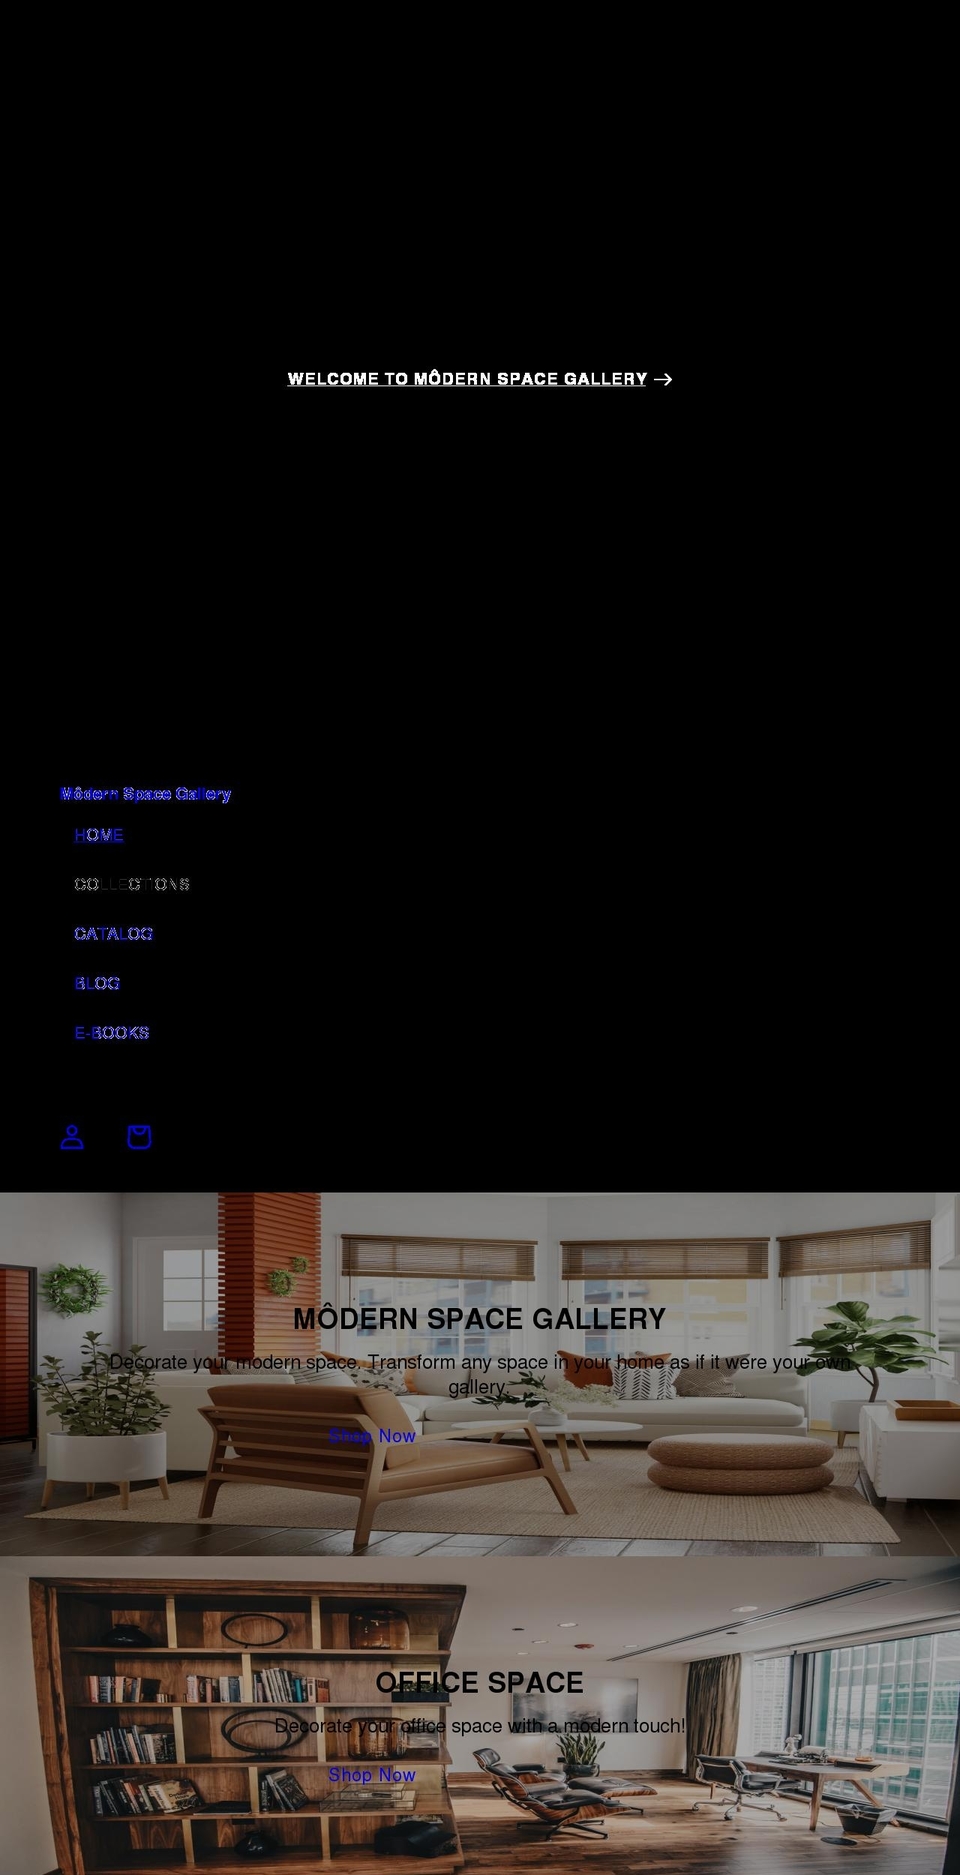 space Shopify theme site example modernspacegallery.com